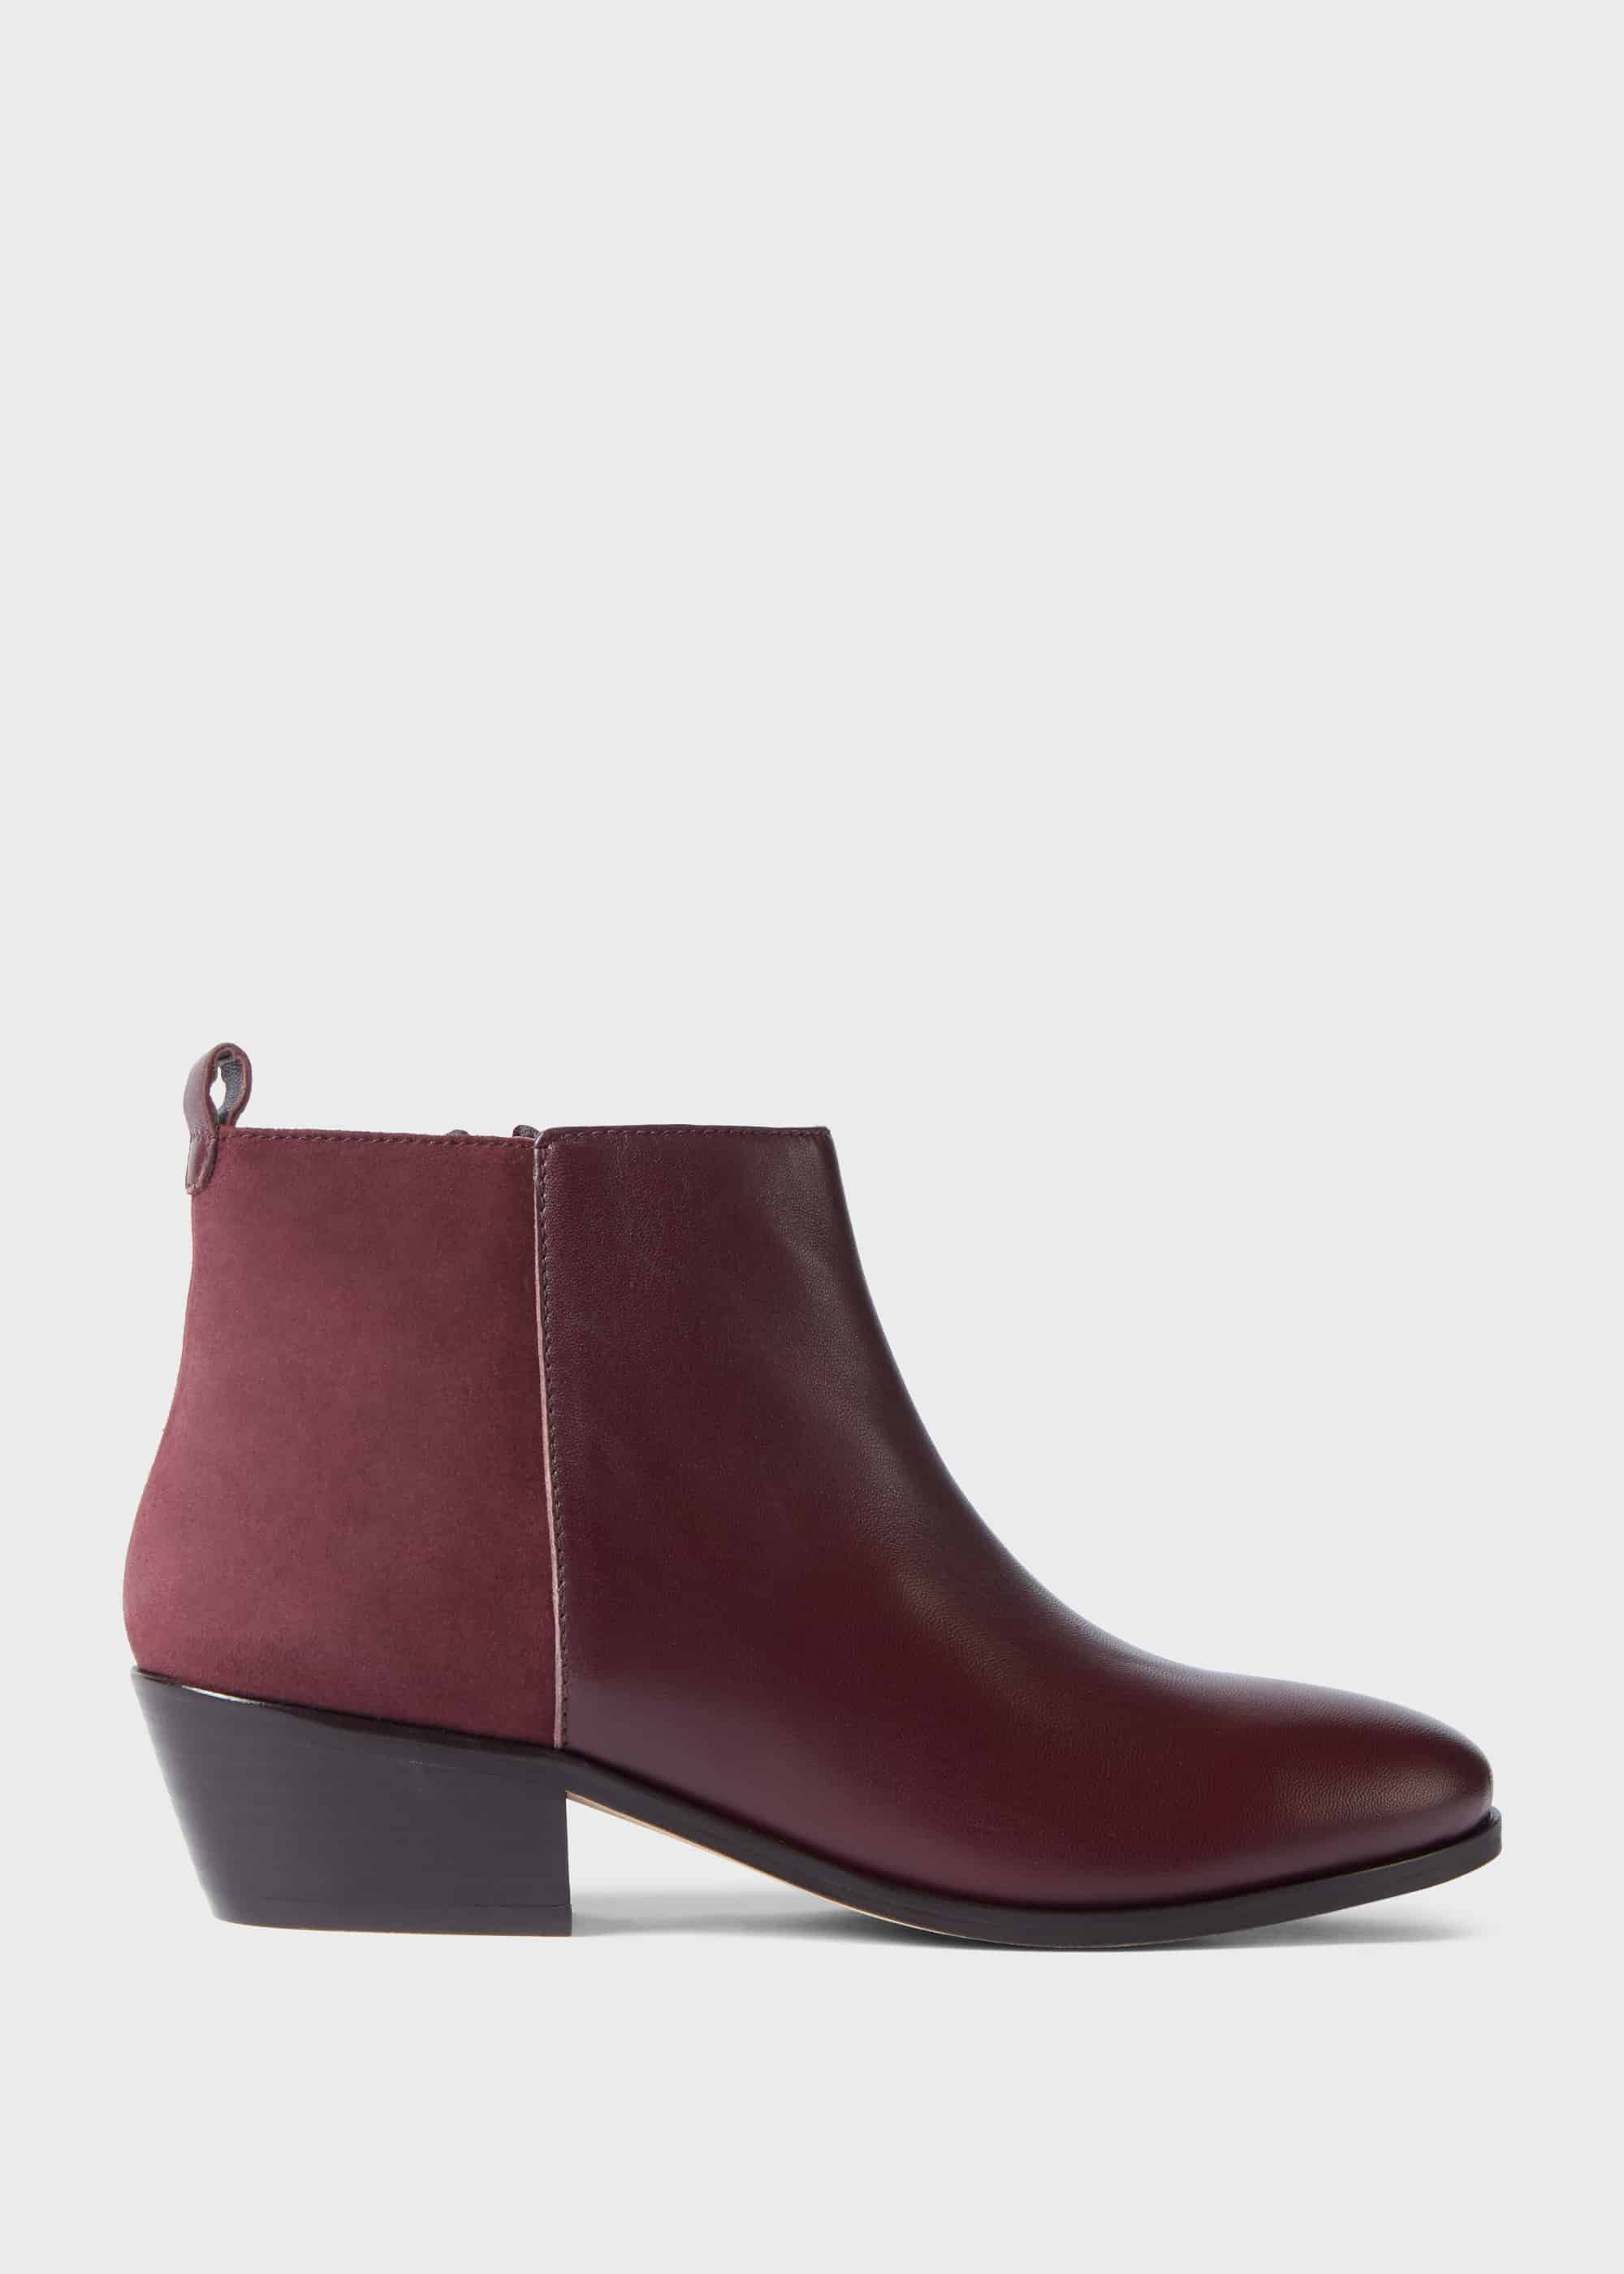 hobbs clearance shoes